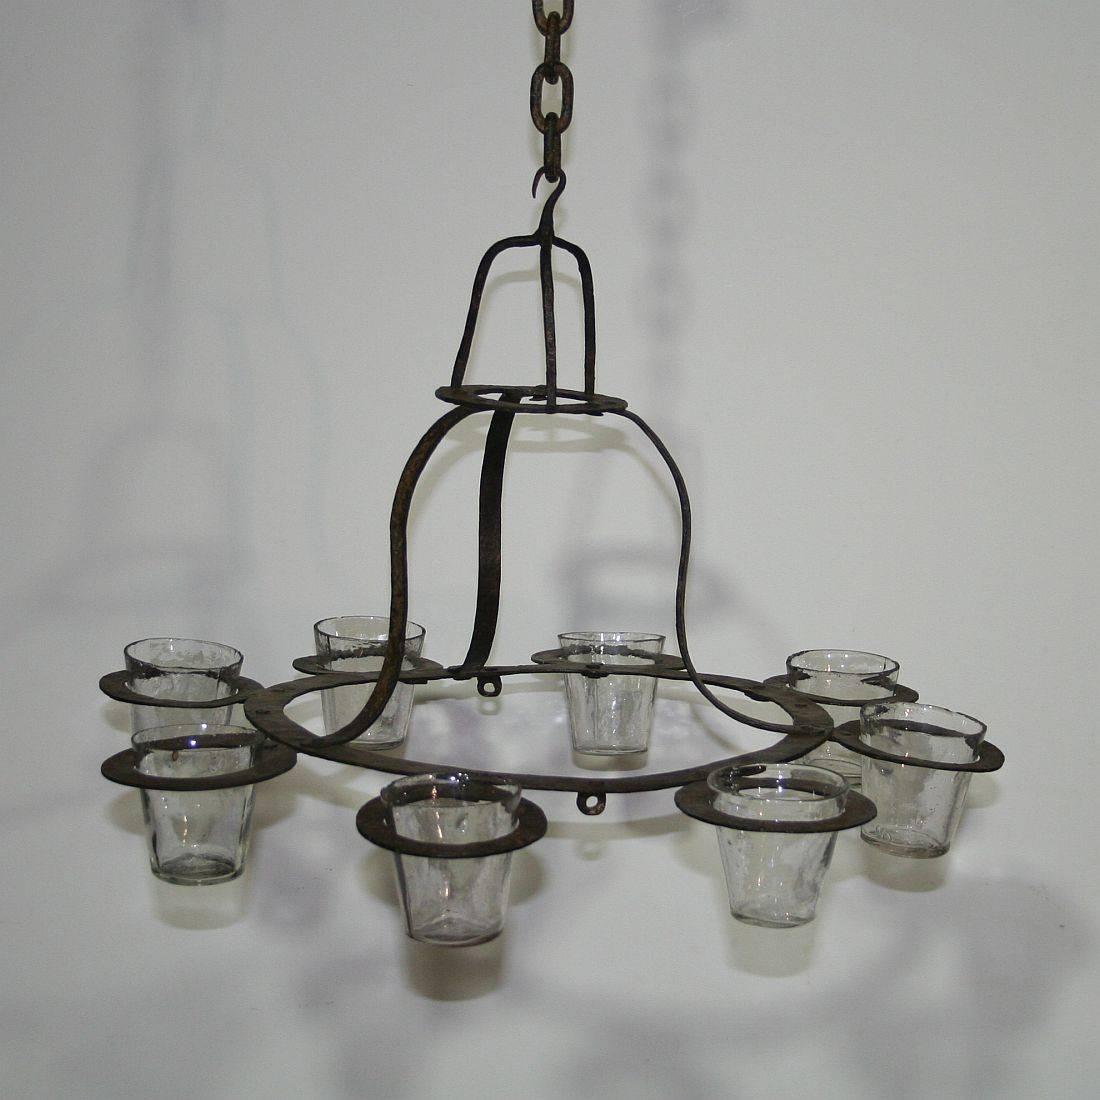 Unique 18th century hand-forged iron chandelier with beautiful glass cups of later date, 
France, circa 1750, glass cups of later date
Weathered, old restorations.
More pictures available on request.